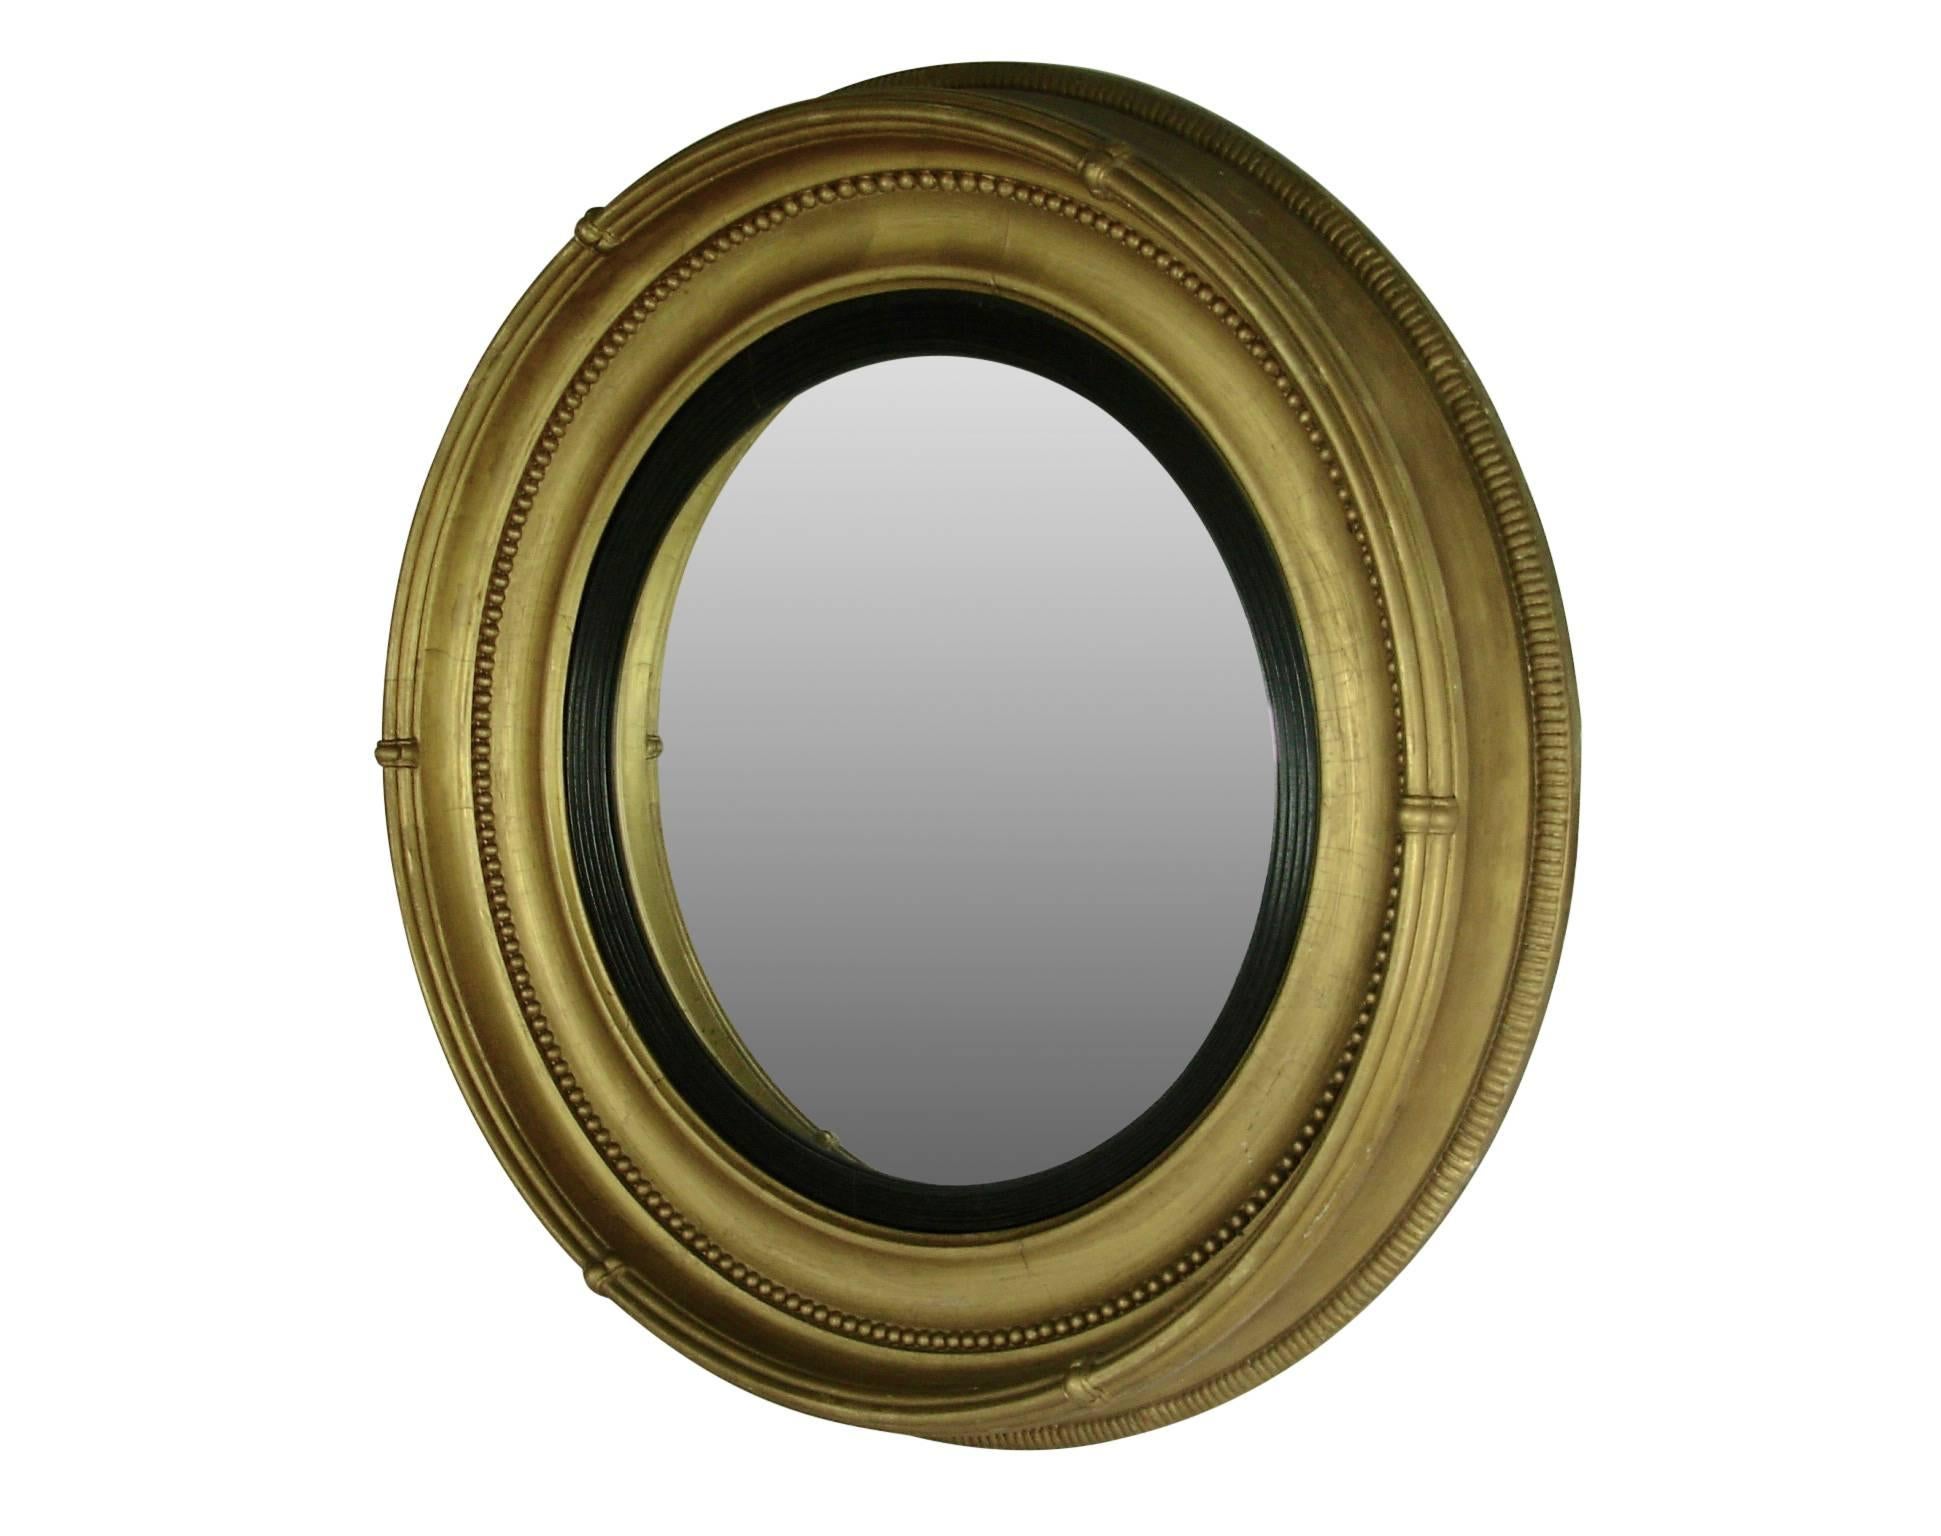 A large-scale Regency style giltwood convex mirror. Old mirror shows some light clouding and spotting. England, mid-19th century.